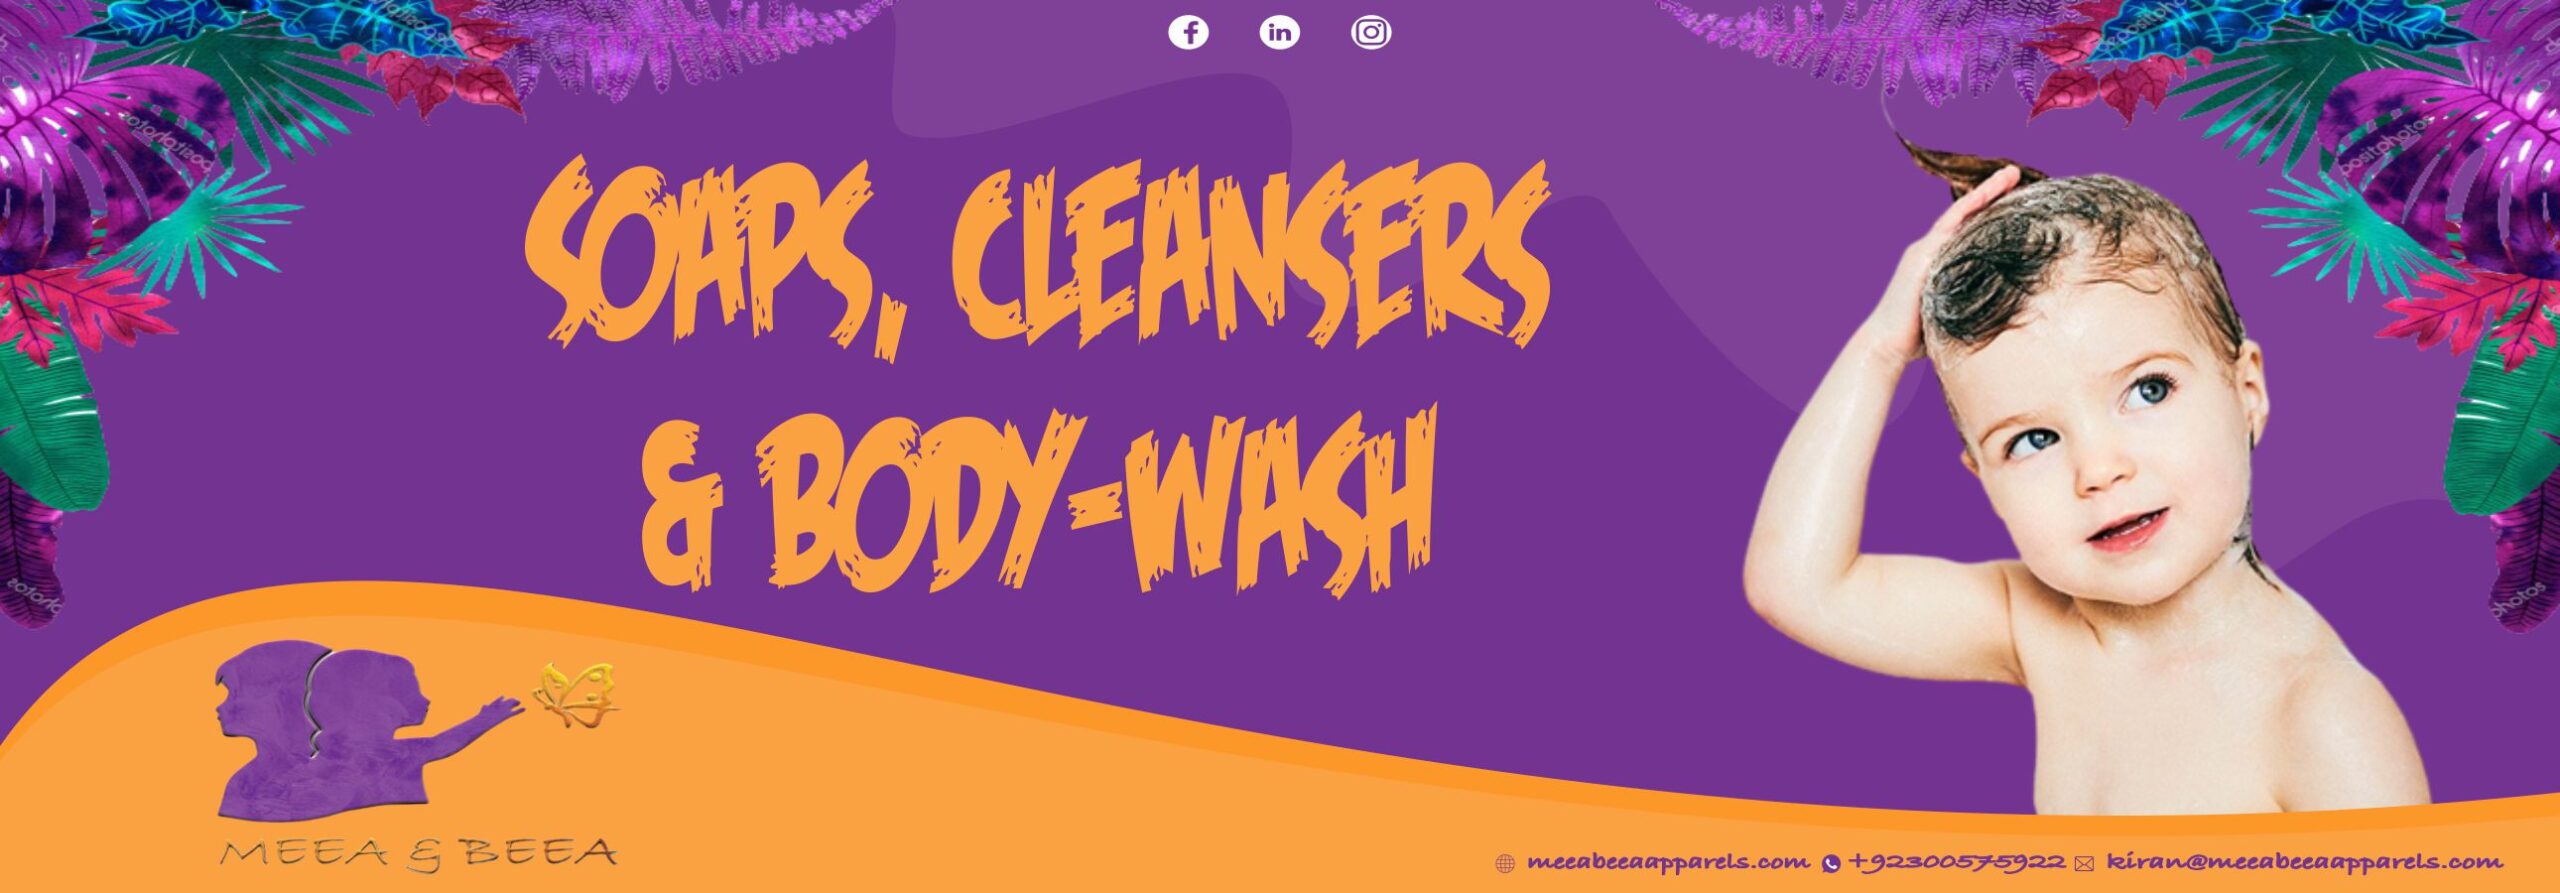 Soaps, Cleansers & Body-wash